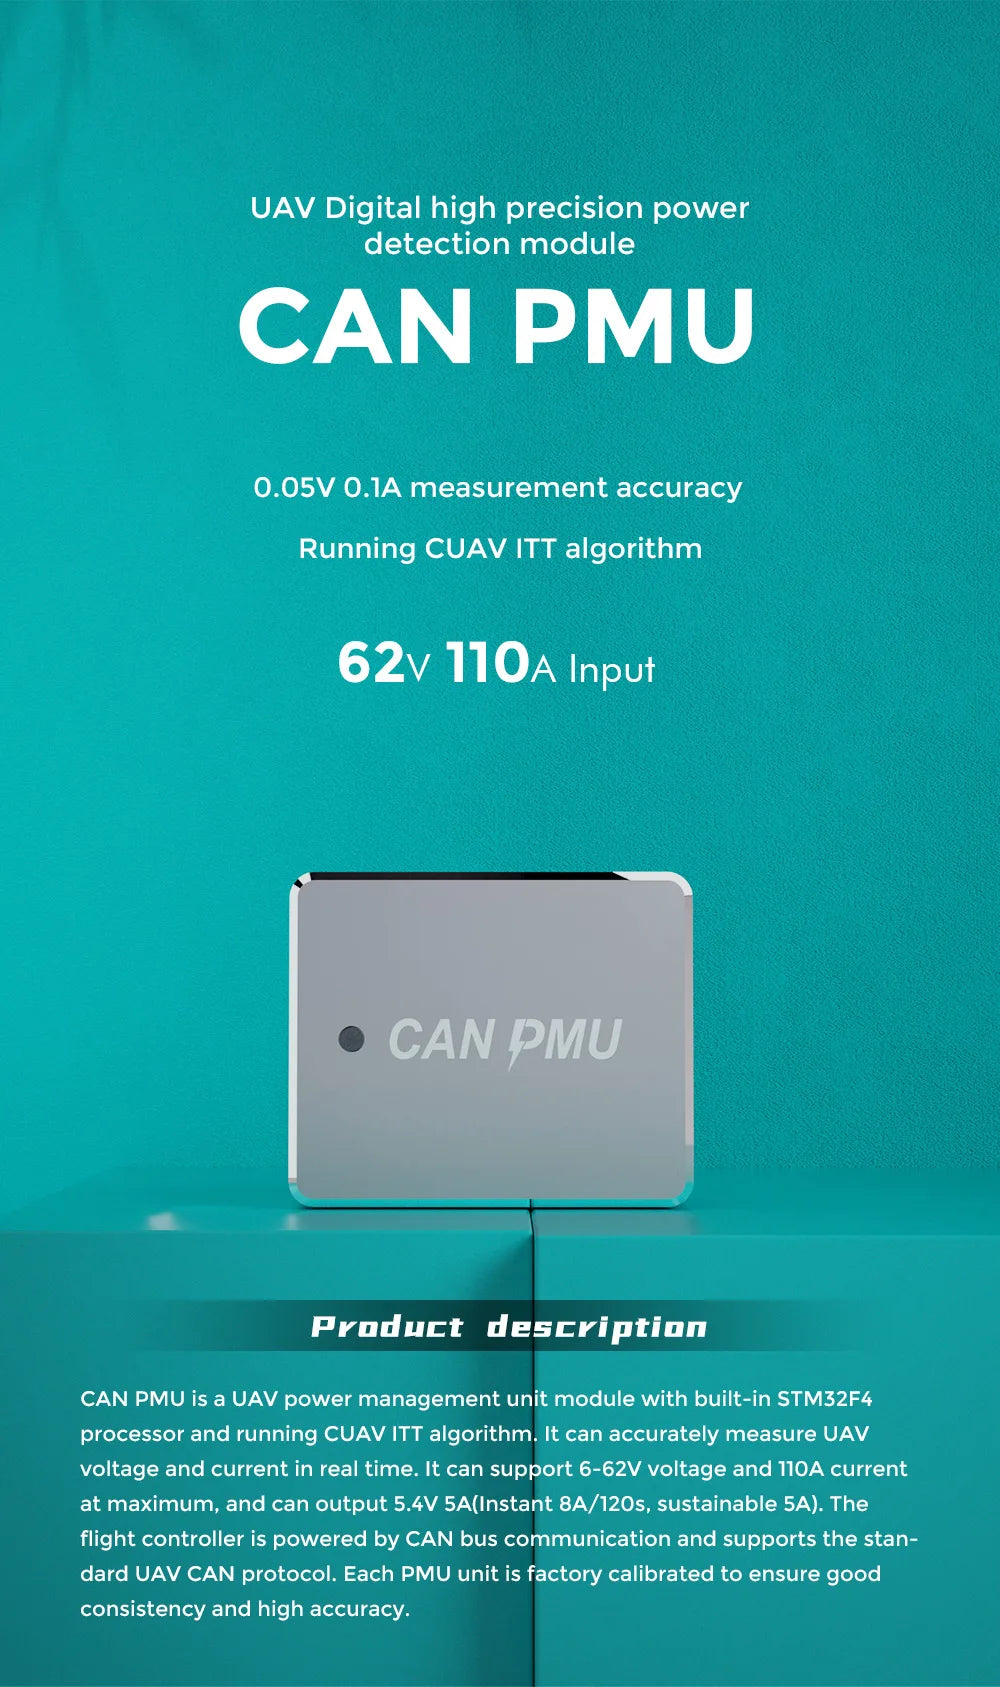 CUAV New PIX CAN PMU, CAN PMU is a UAV power management unit module with built-in STM